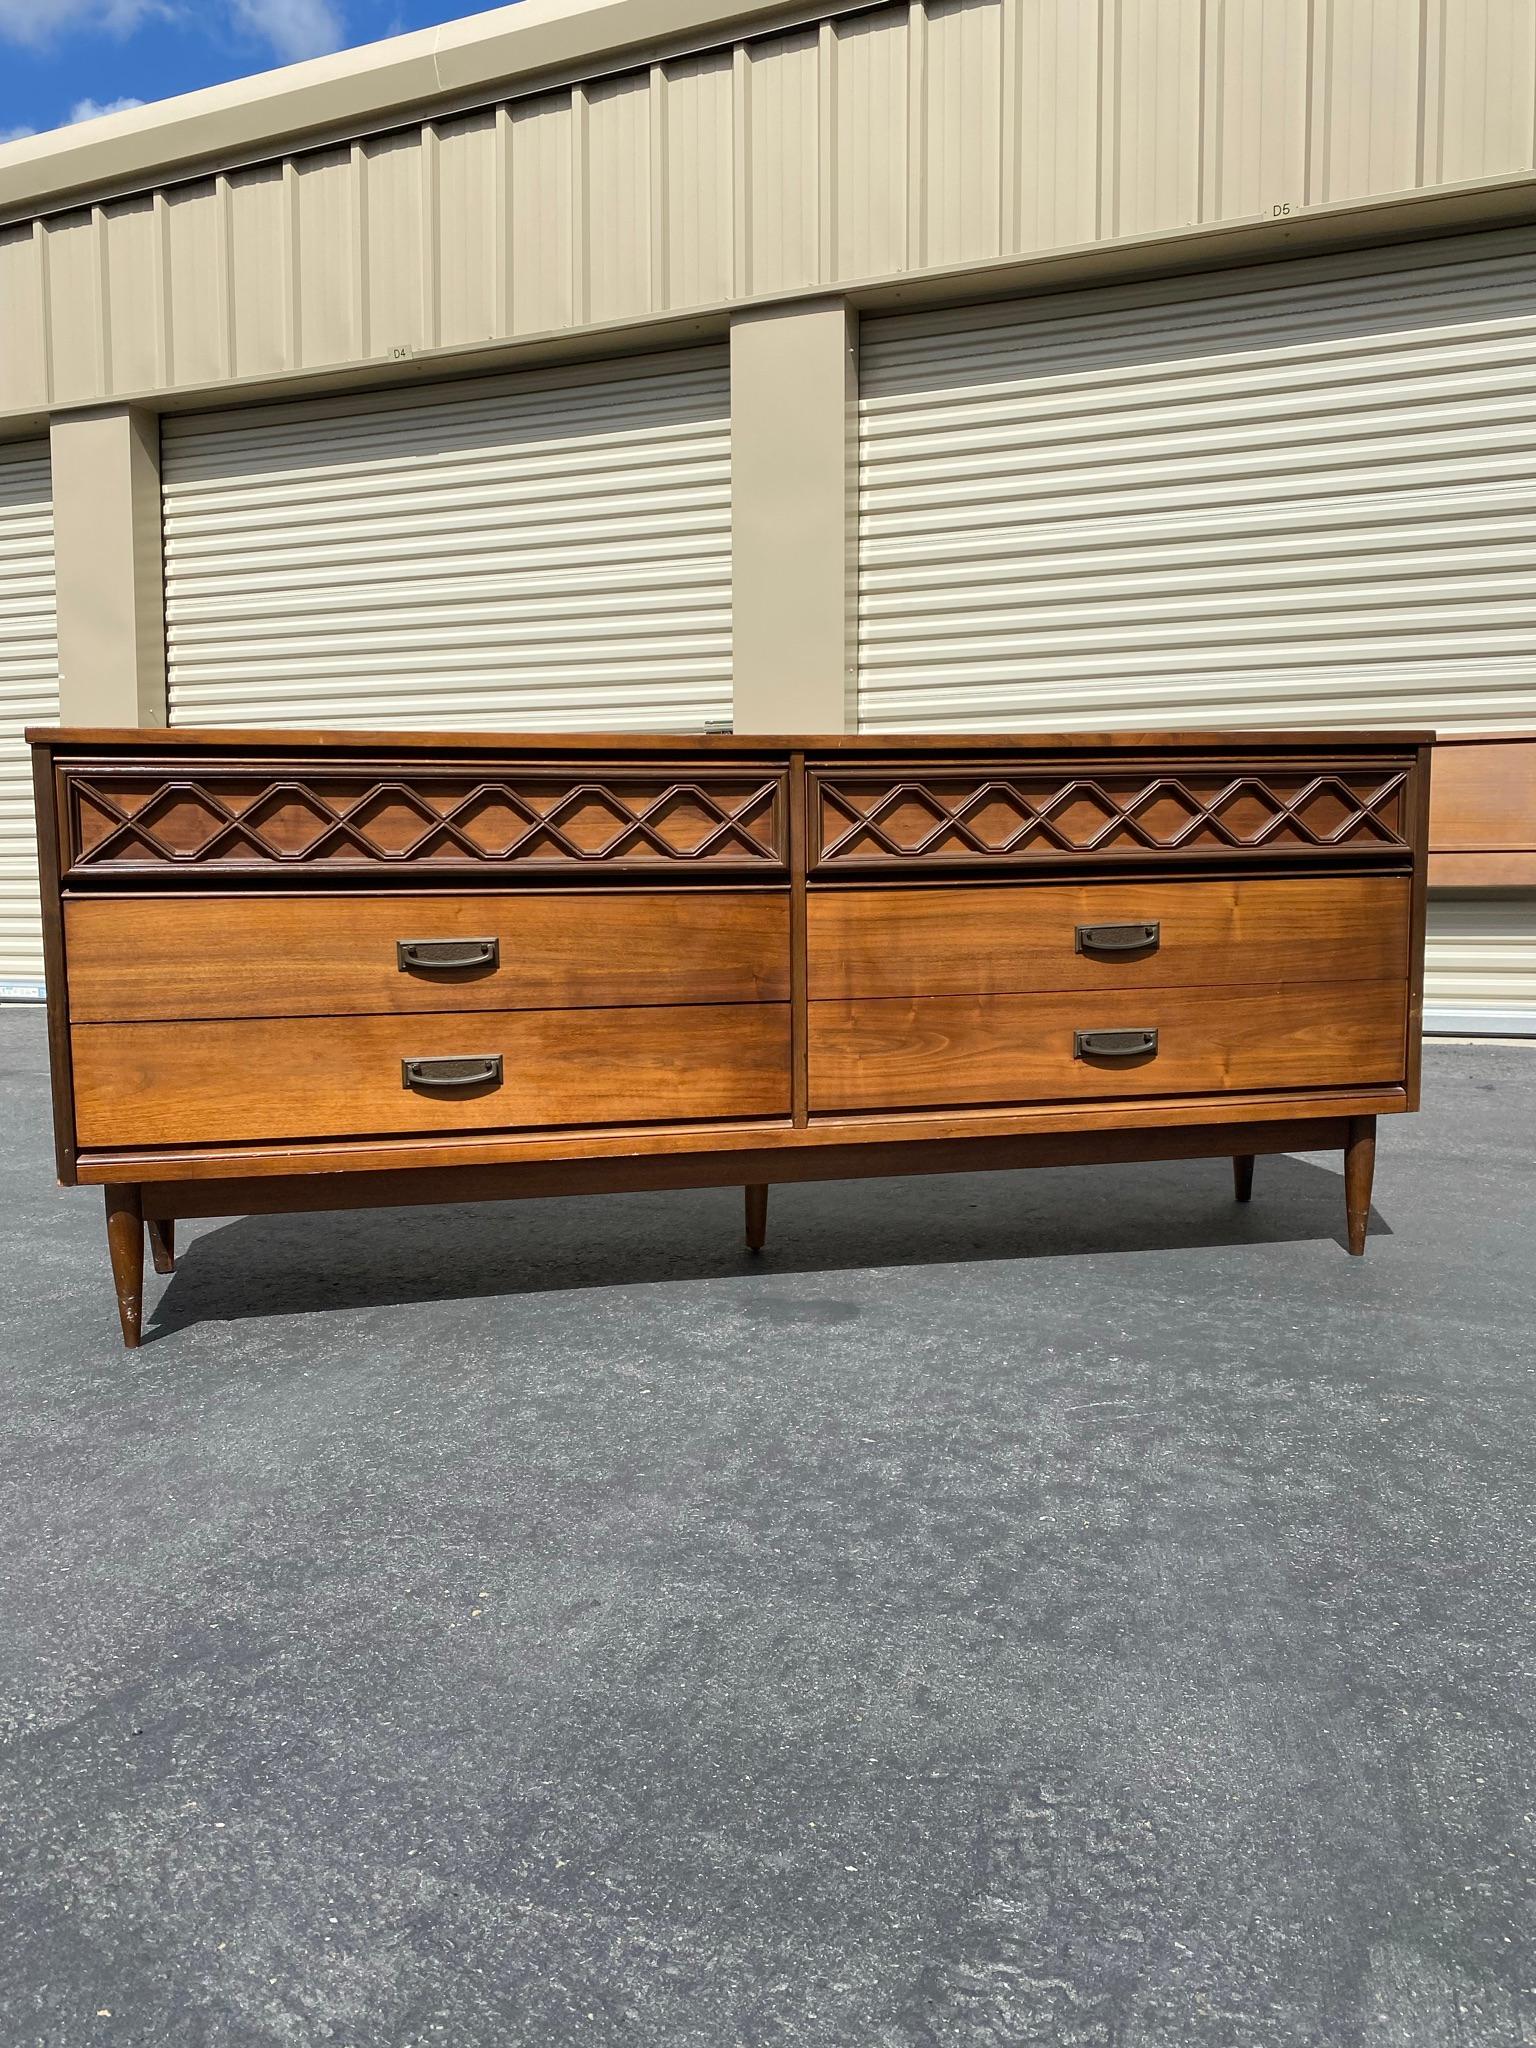 Gorgeous mid century dresser. In good vintage condition. Minor knicks throughout. All drawers slide smoothly.